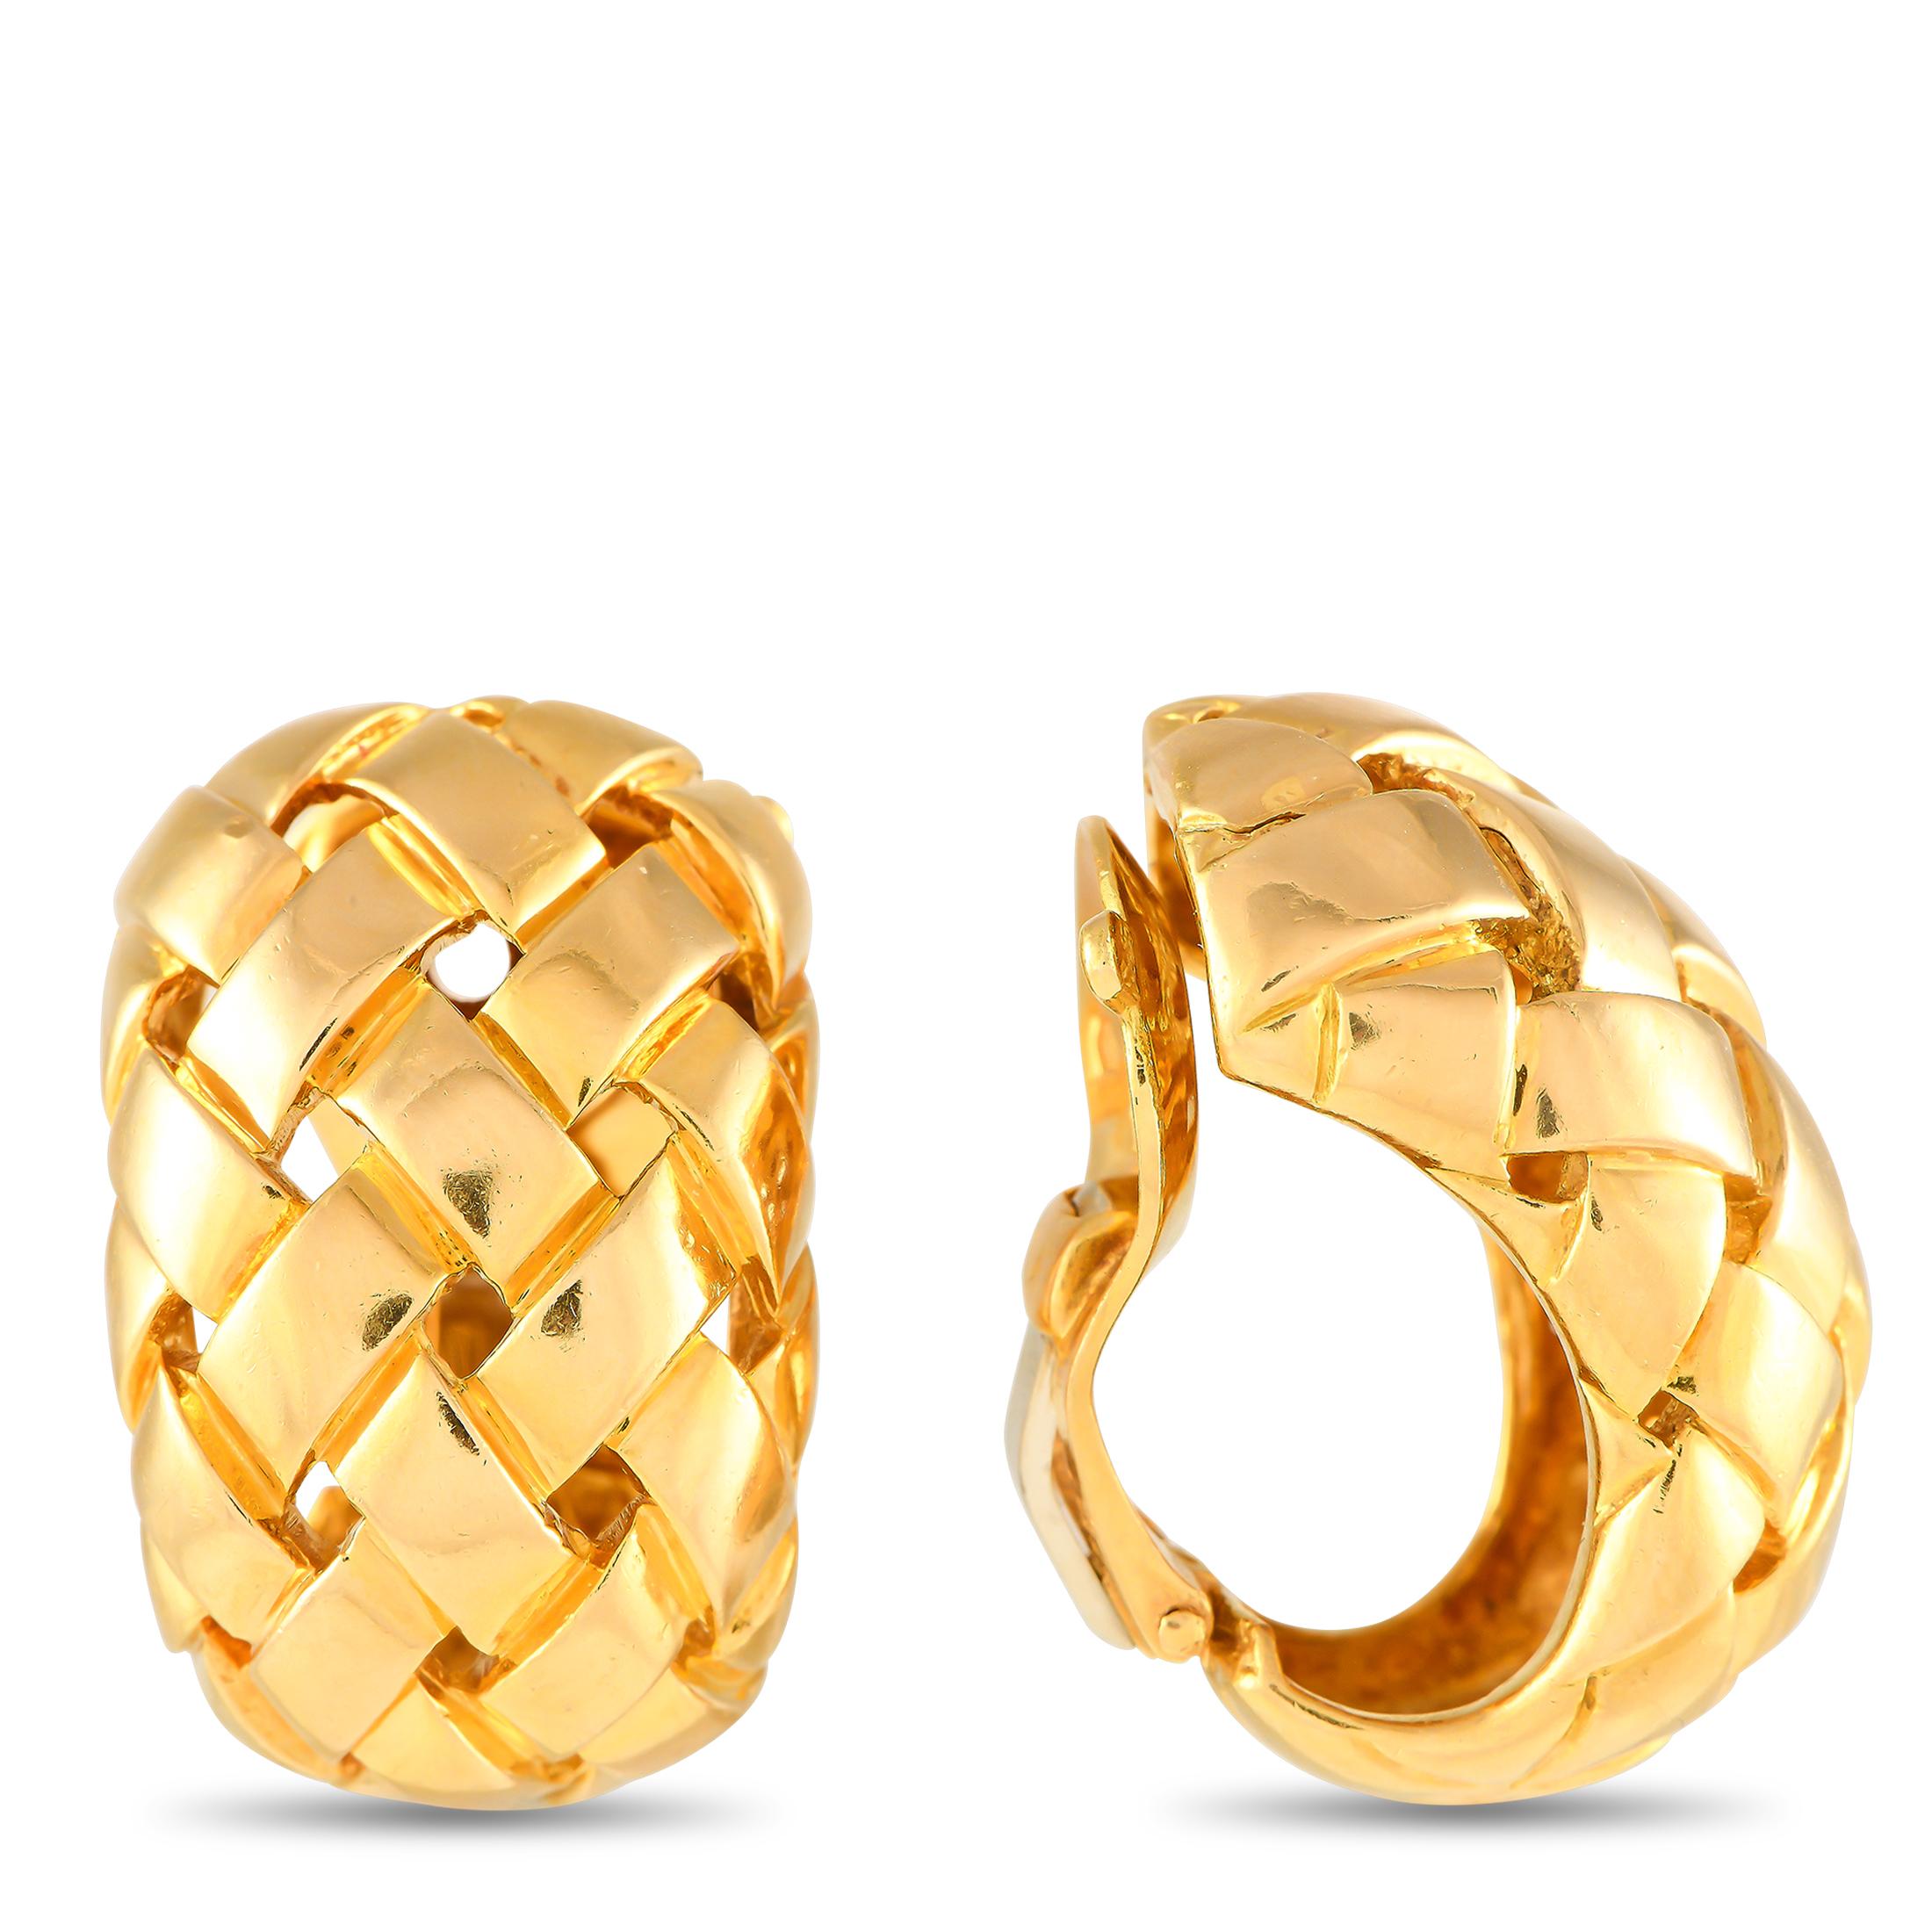 Infuse a sense of nostalgia and sophistication into your jewellery wardrobe with these Van Cleef & Arpels Basket Weave hoops. These thick huggie hoops feature a criss-cross woven pattern that can surely add texture and dimension to your looks. Each